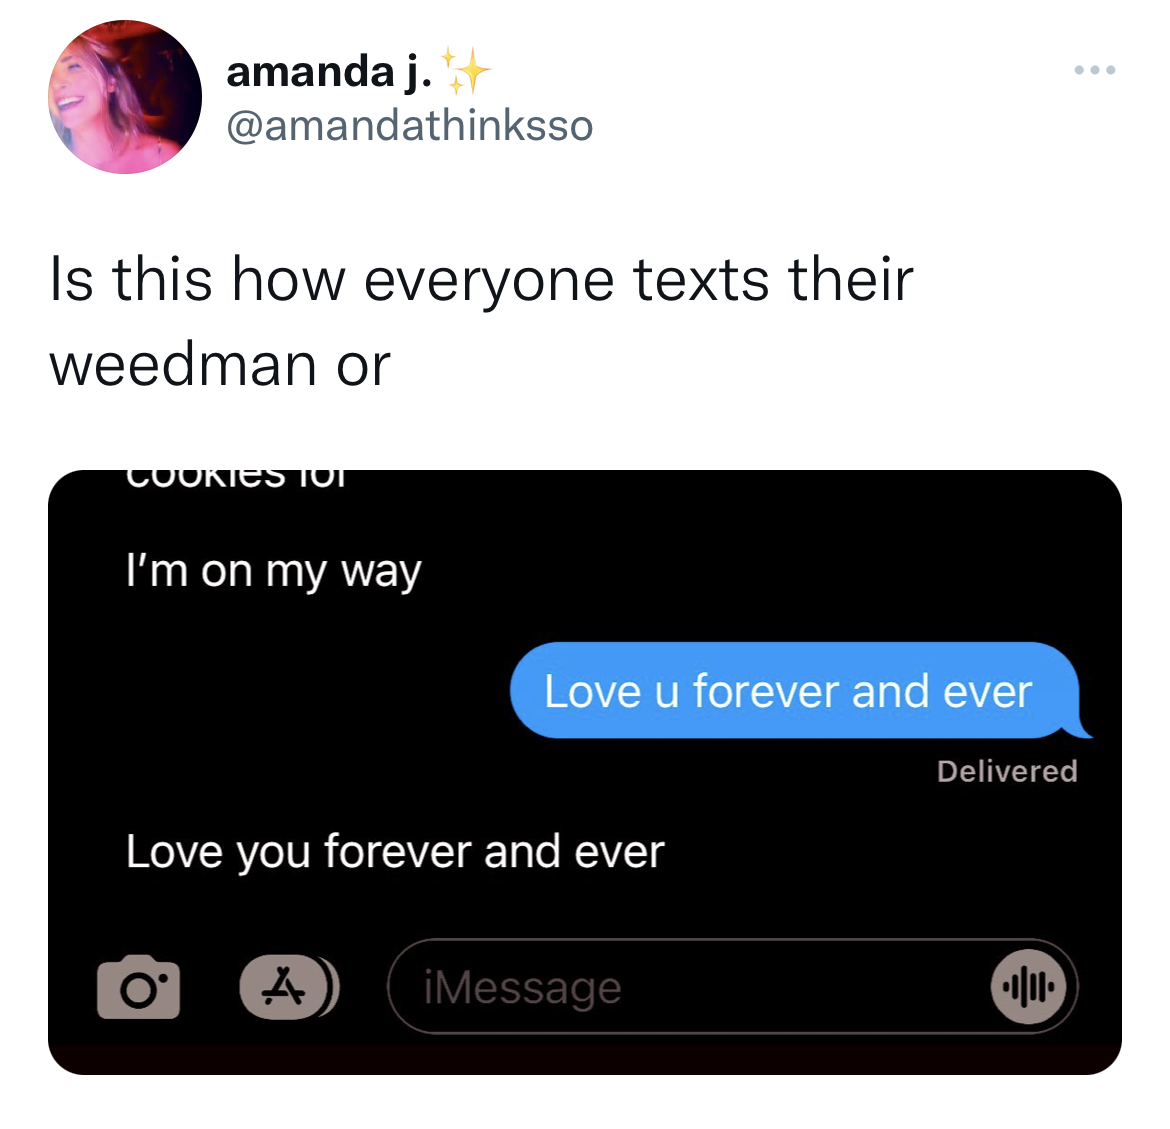 Tweets of the week - multimedia - amanda j. Is this how everyone texts their weedman or Cookies Tot I'm on my way Love u forever and ever Love you forever and ever A iMessage Delivered